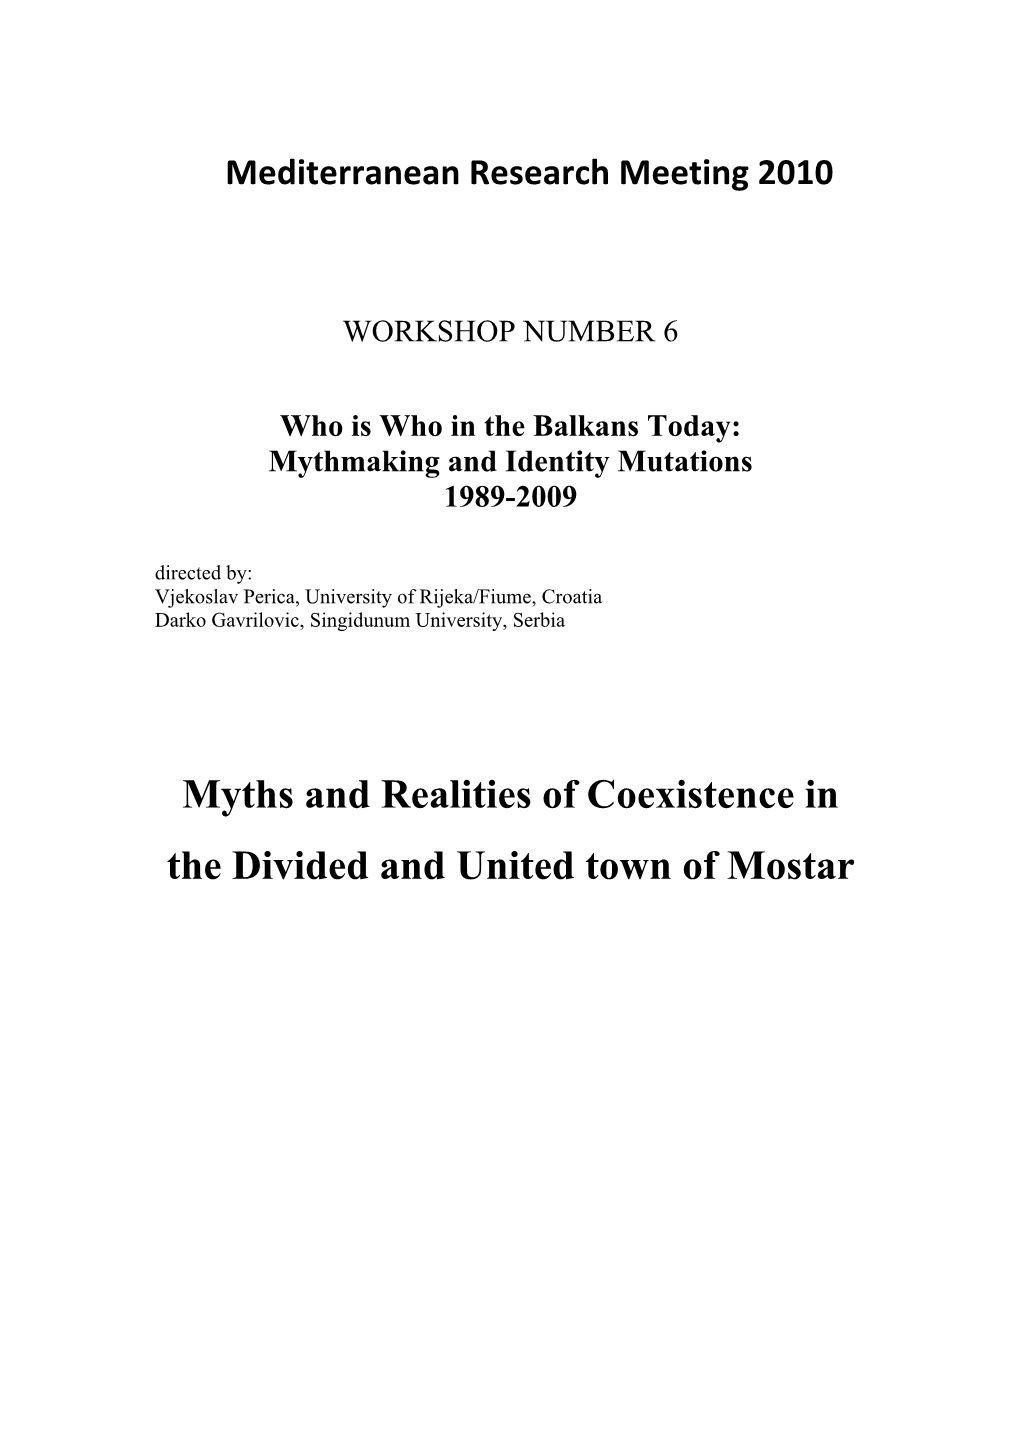 Myths and Realities of Coexistence in the Divided and United Town of Mostar Vanni D’Alessio